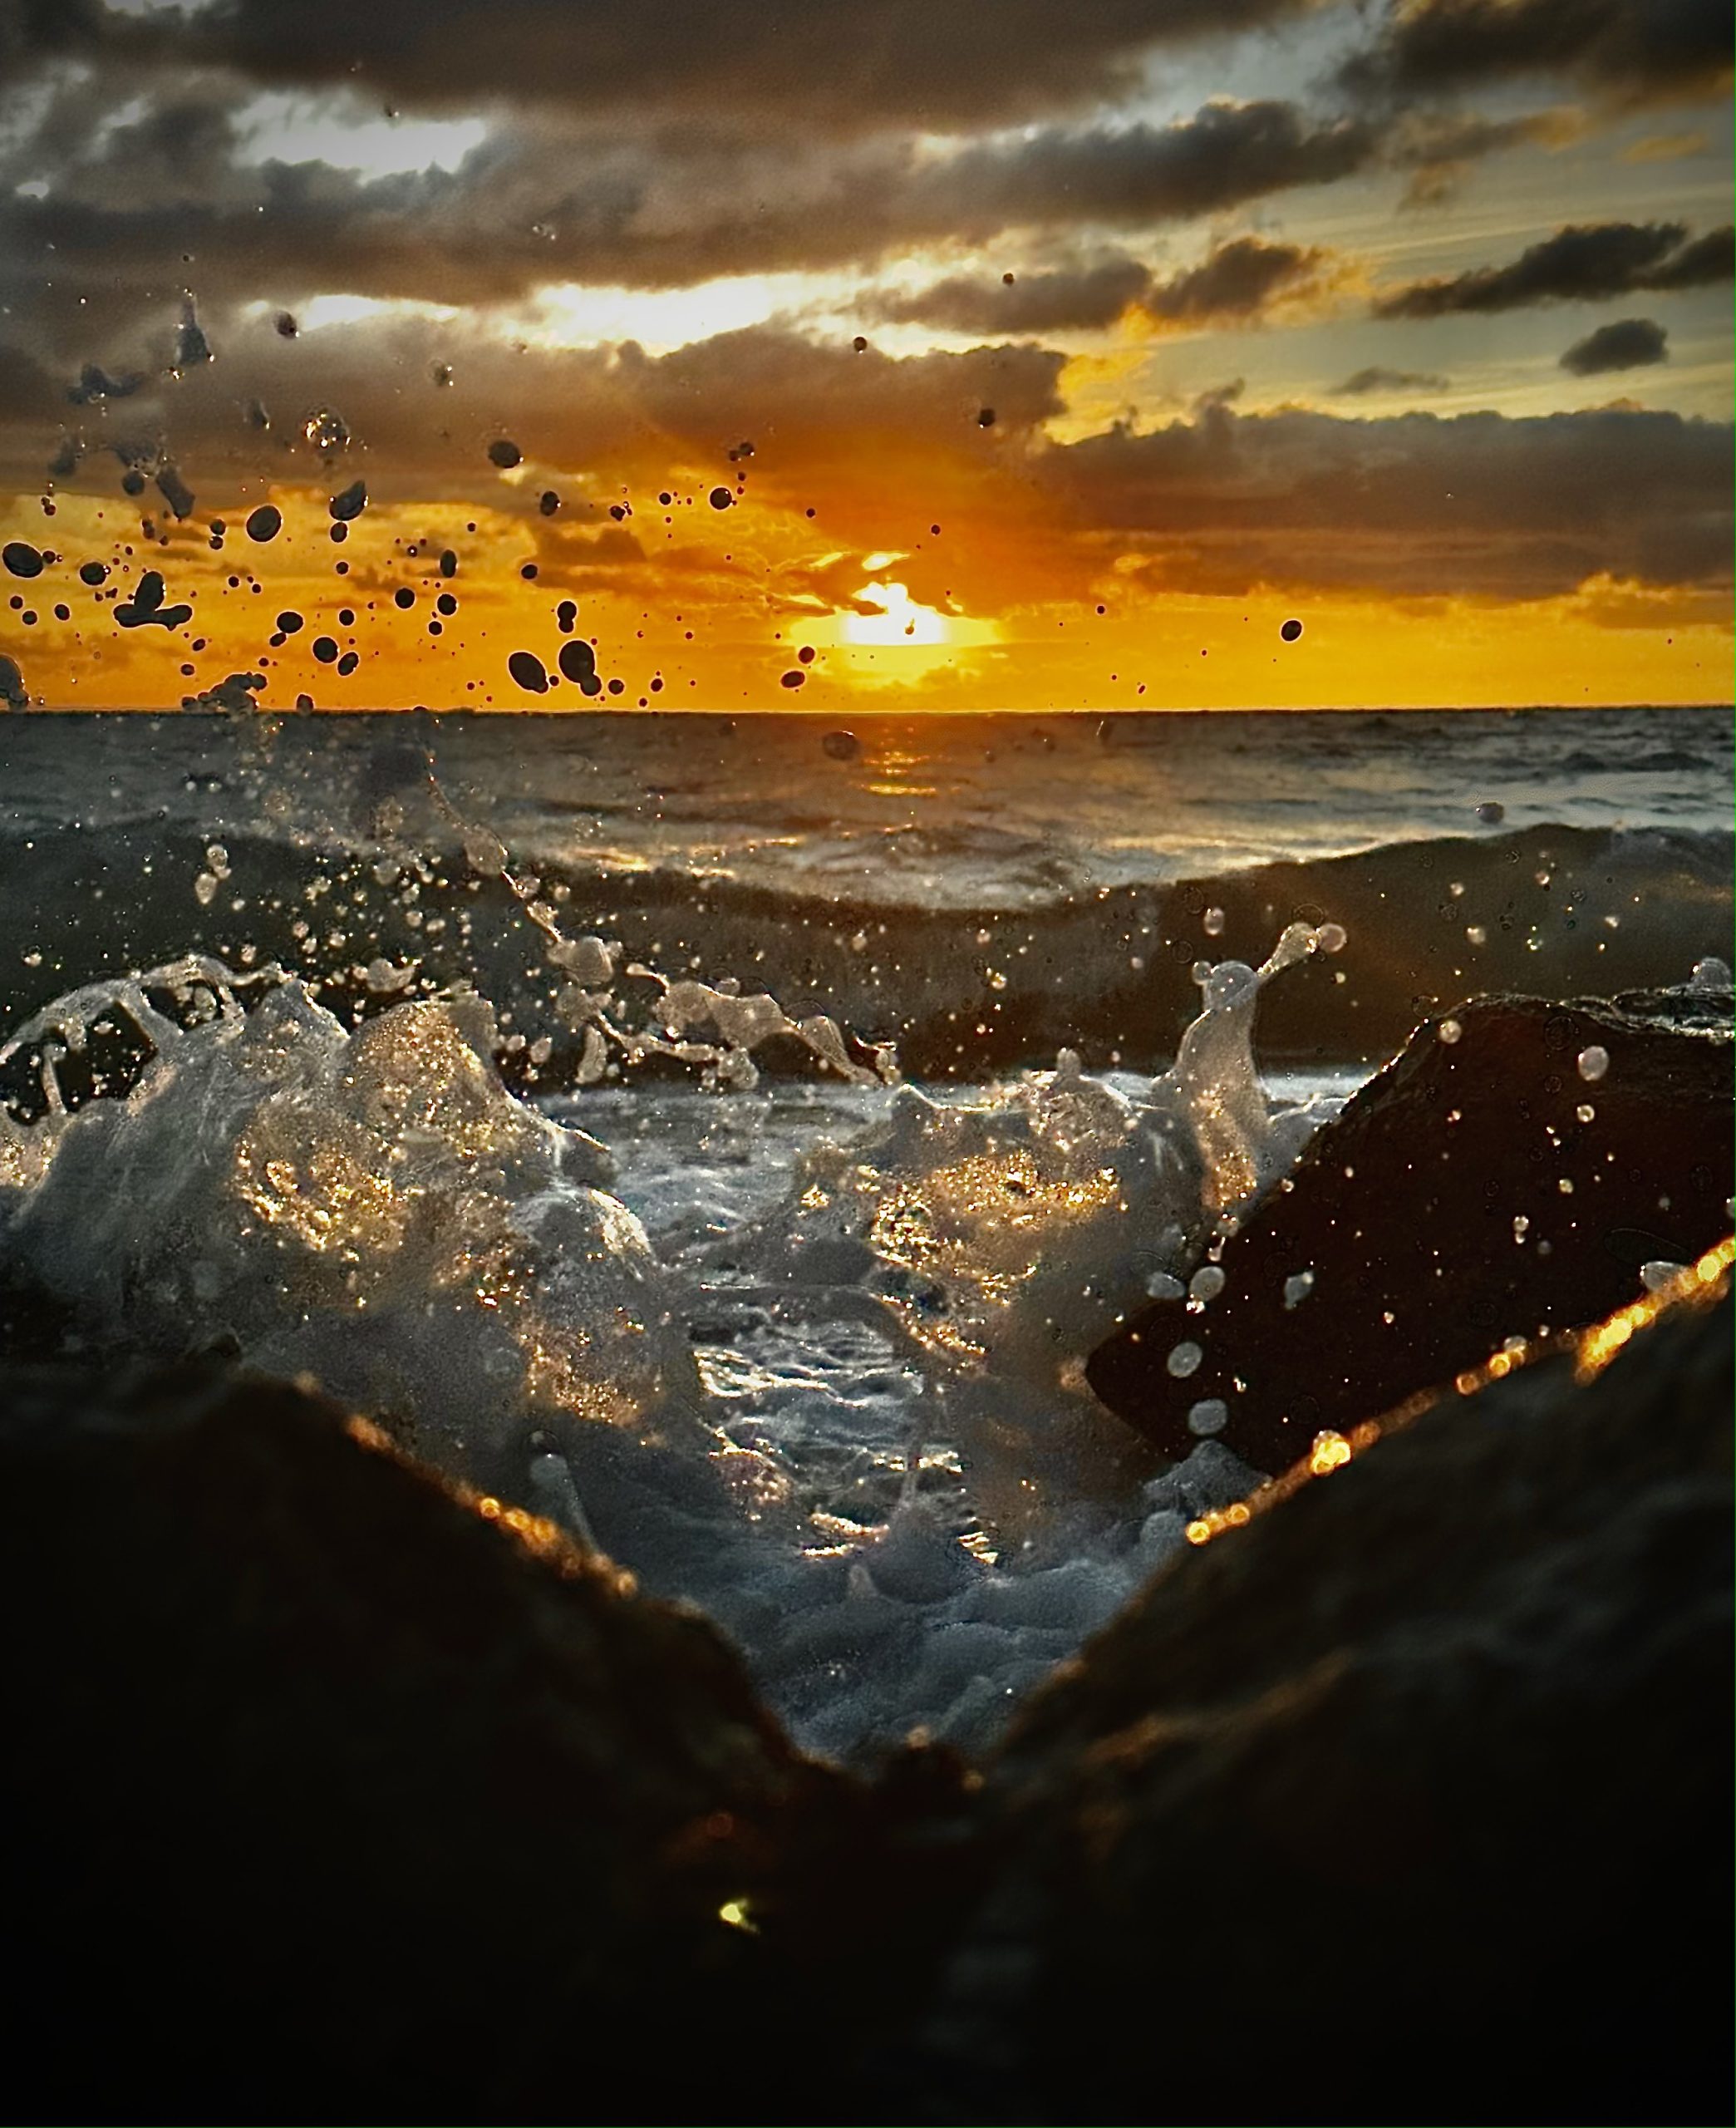 frozen image of water lapping over the rocks of the beach, with the sun setting behind it.